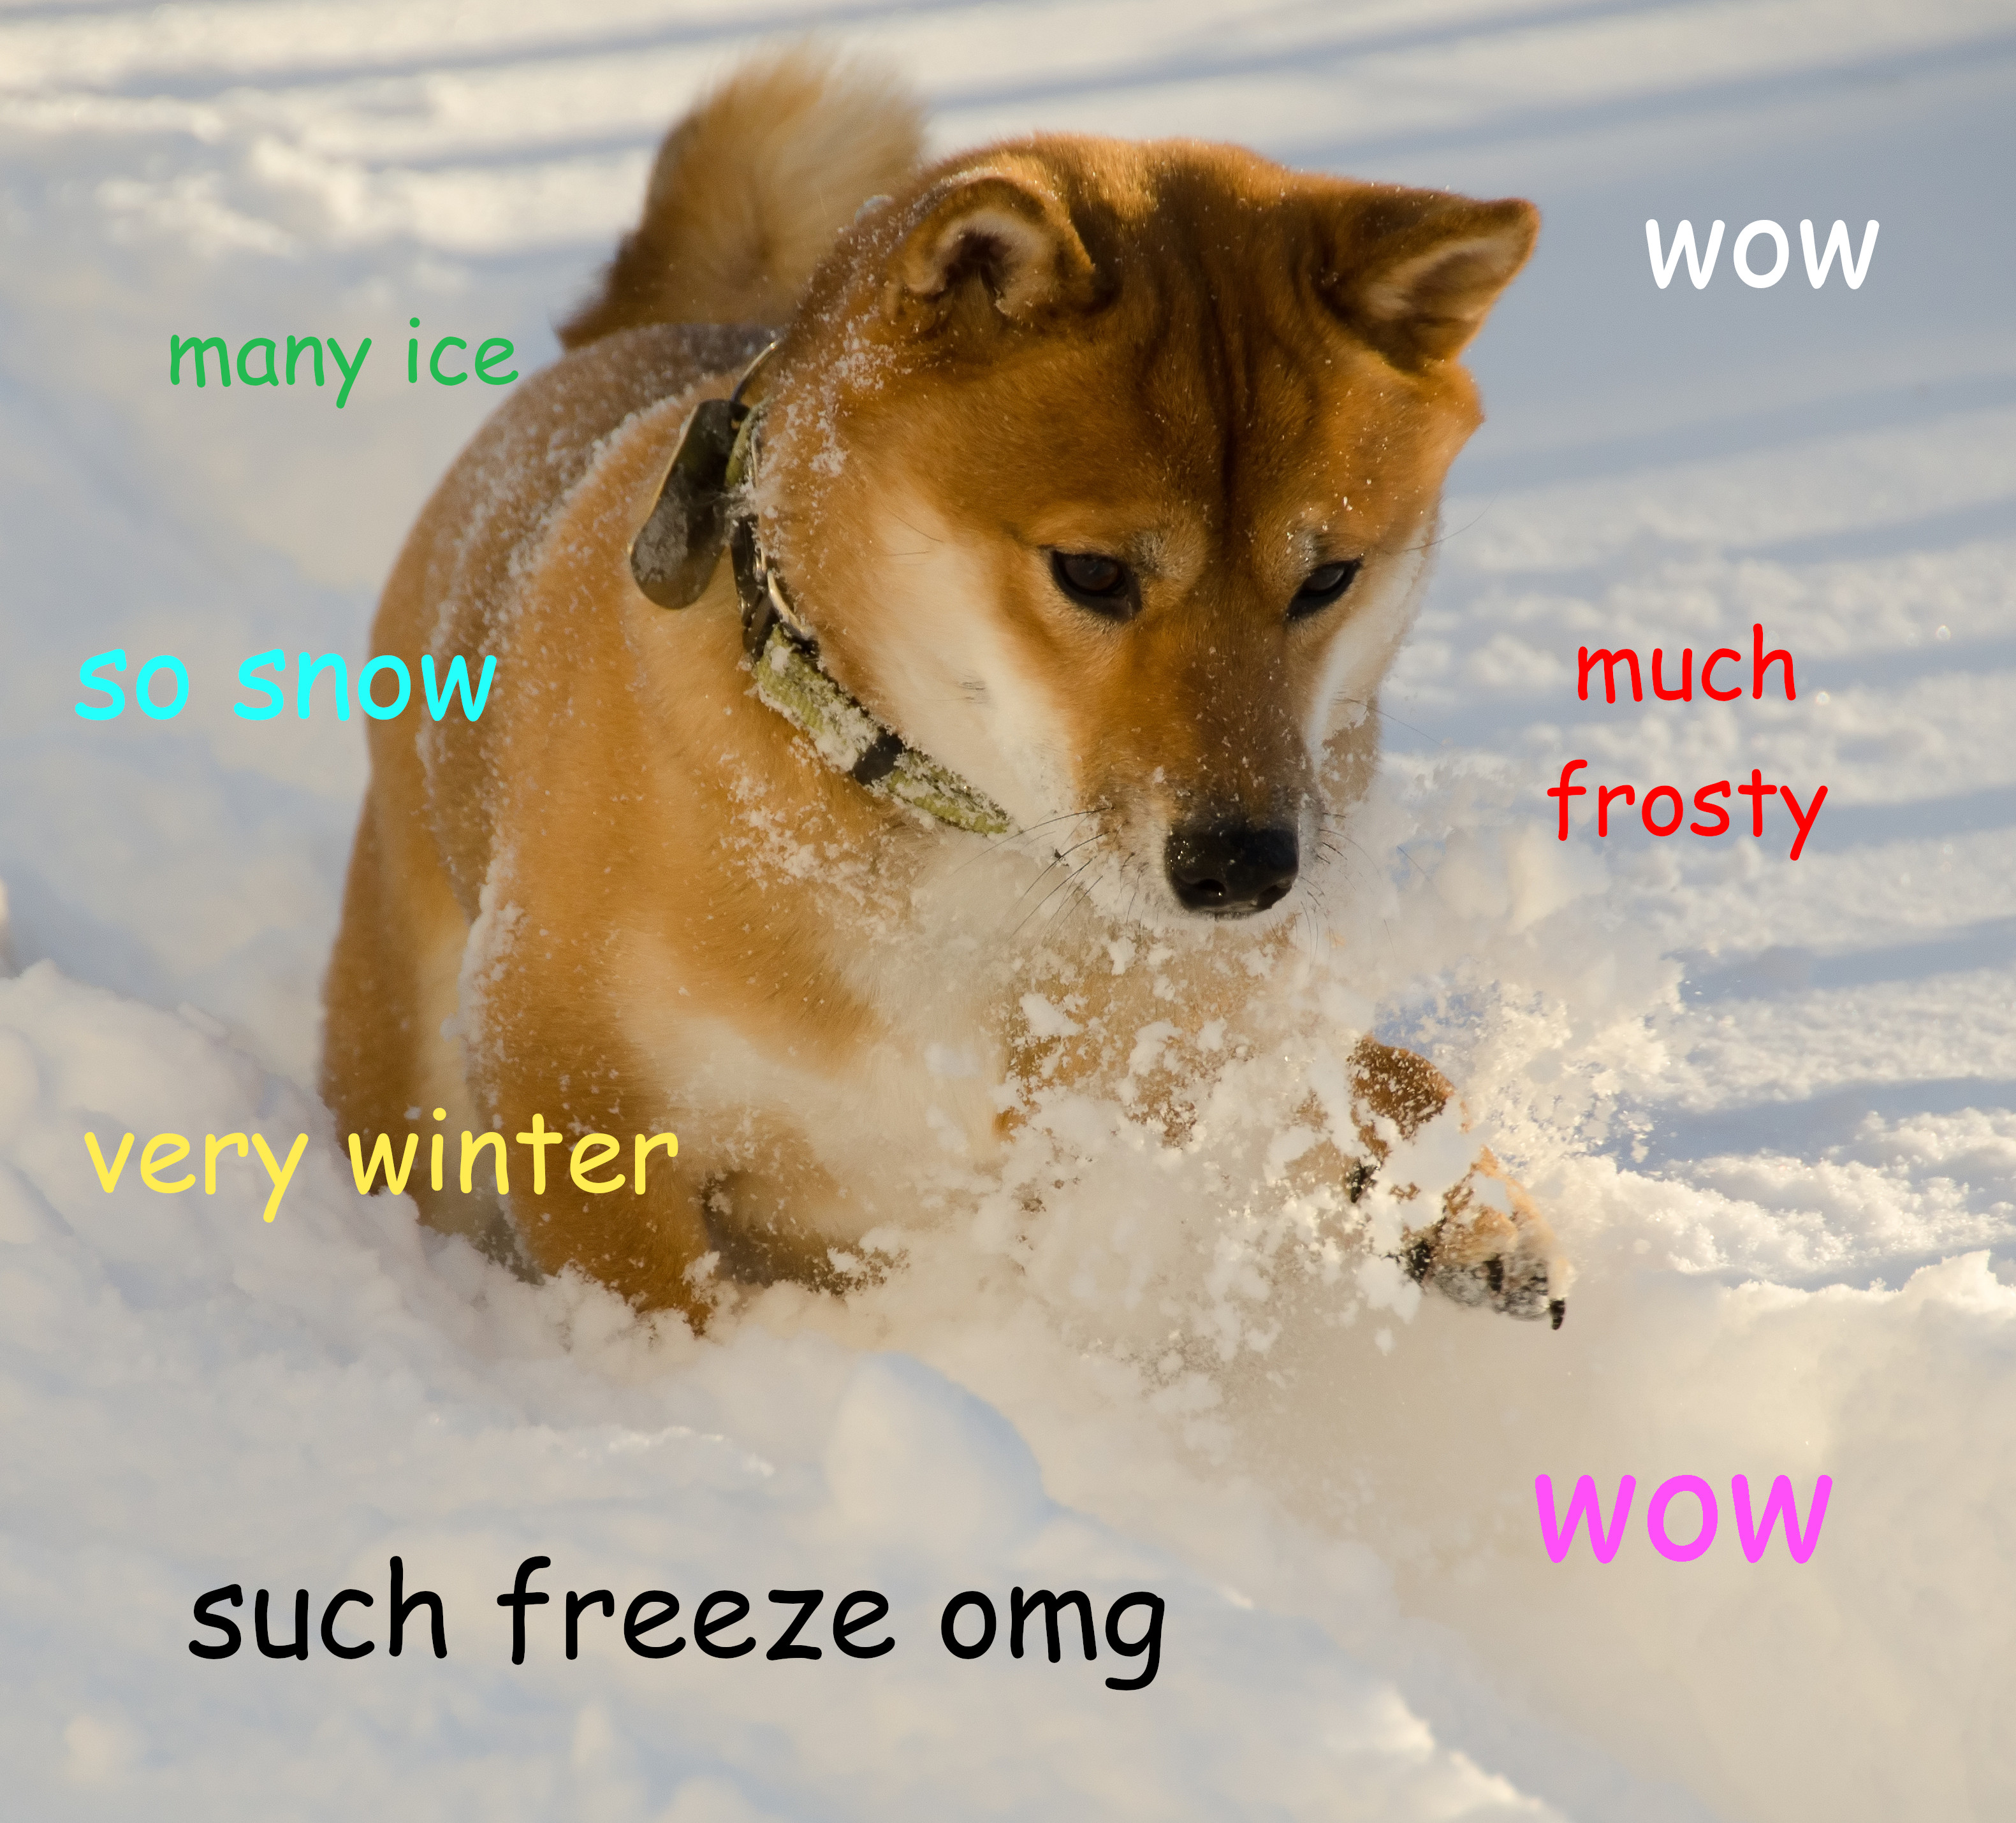 Shiba Inu behind ‘Doge’ meme makes surprising recovery, owner announces